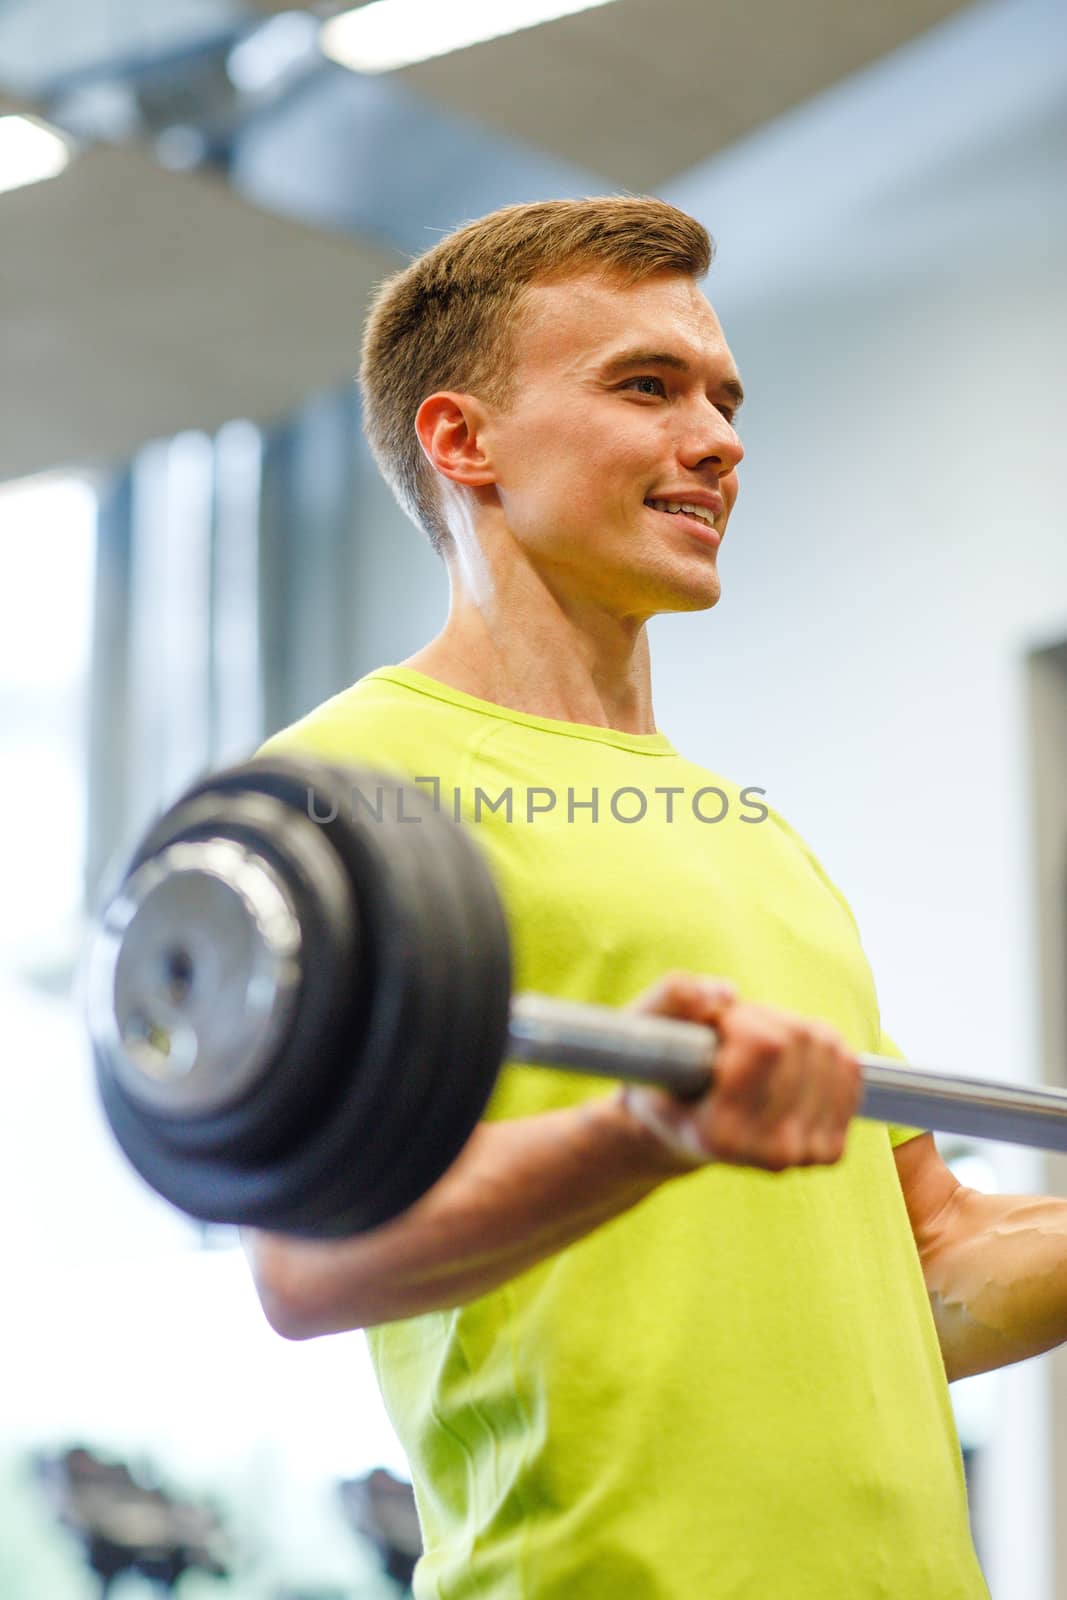 sport, fitness, lifestyle and people concept - smiling man doing exercise with barbell in gym